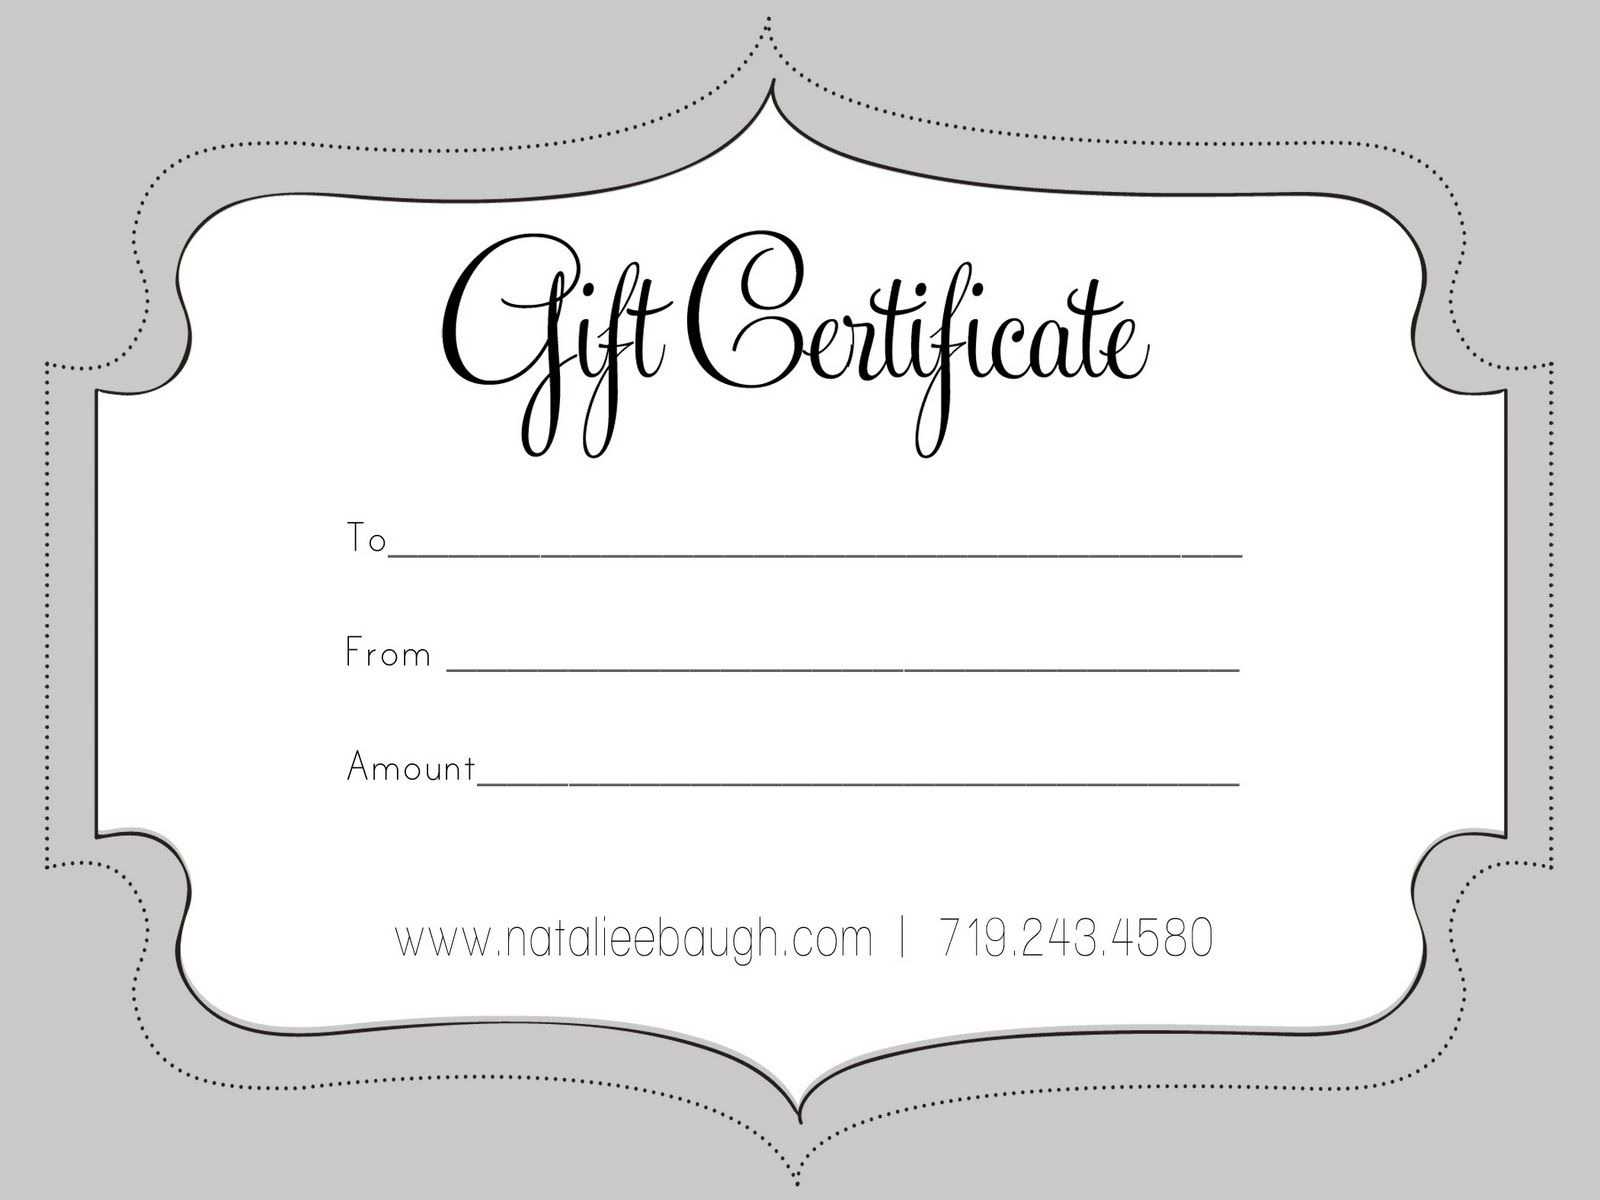 A Cute Looking Gift Certificate | S P A | Gift Certificate Pertaining To Black And White Gift Certificate Template Free